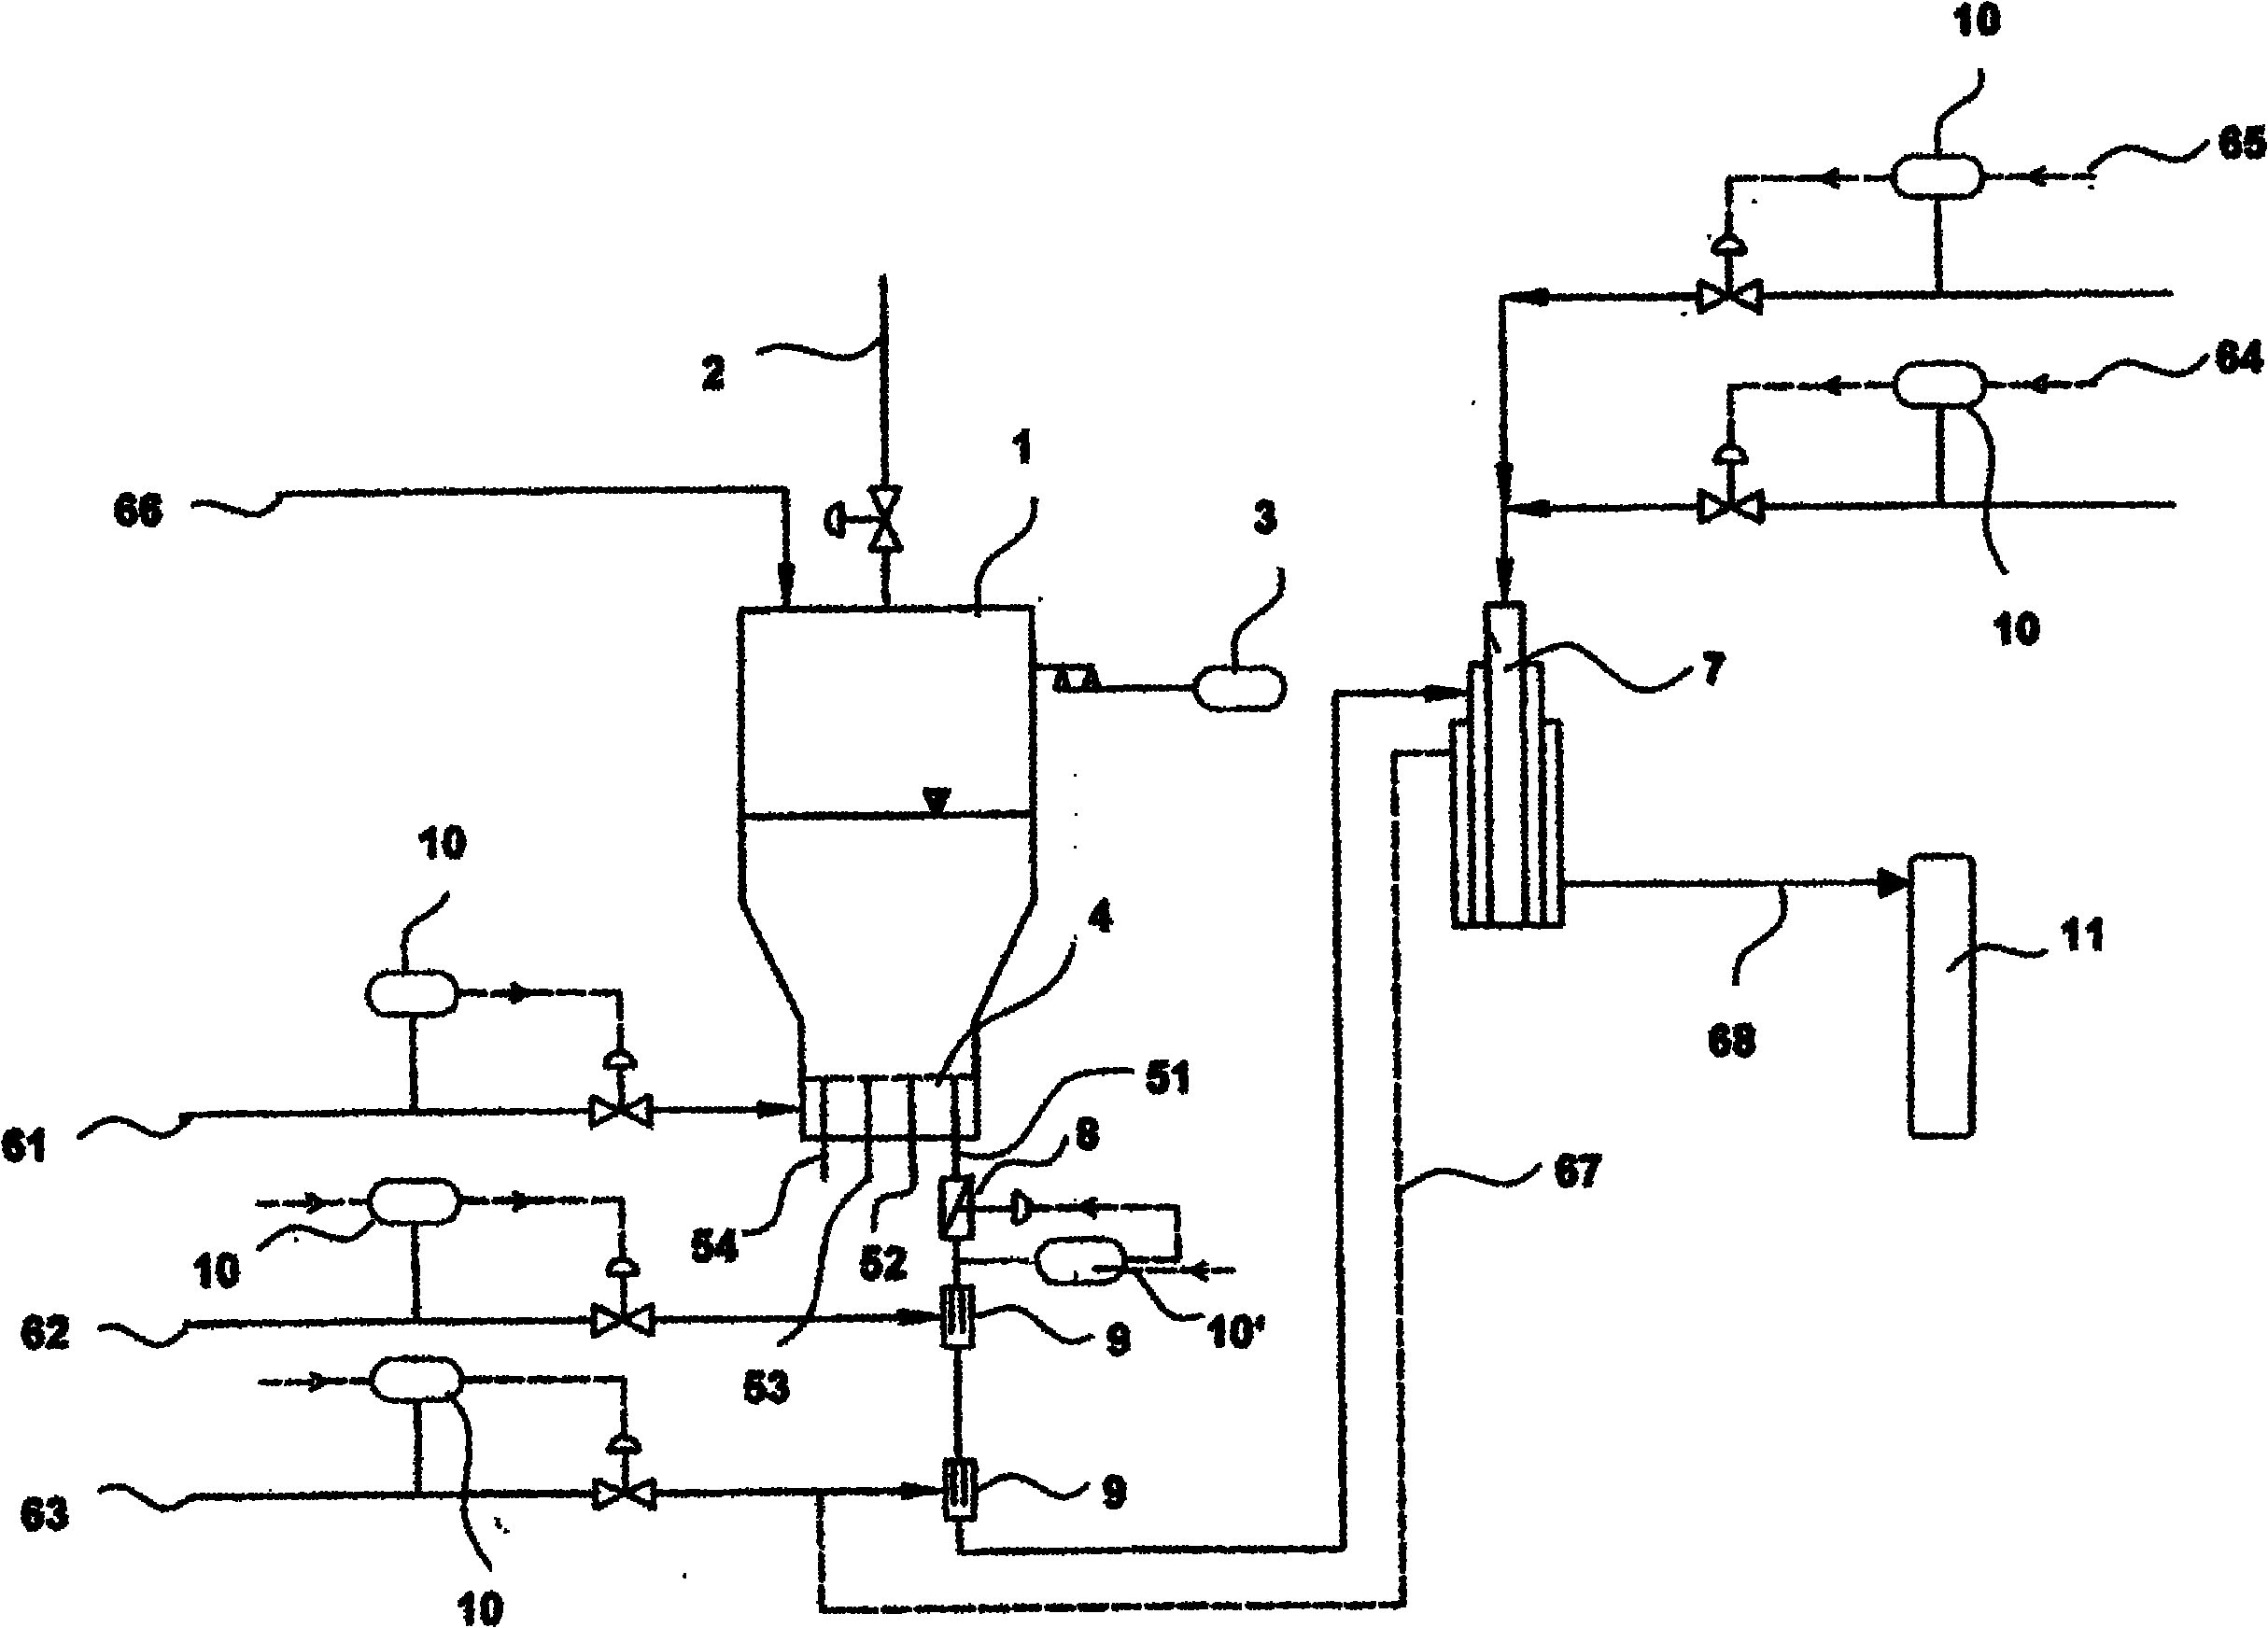 Method and apparatus for starting up gasifying reactors operated with combustible dust